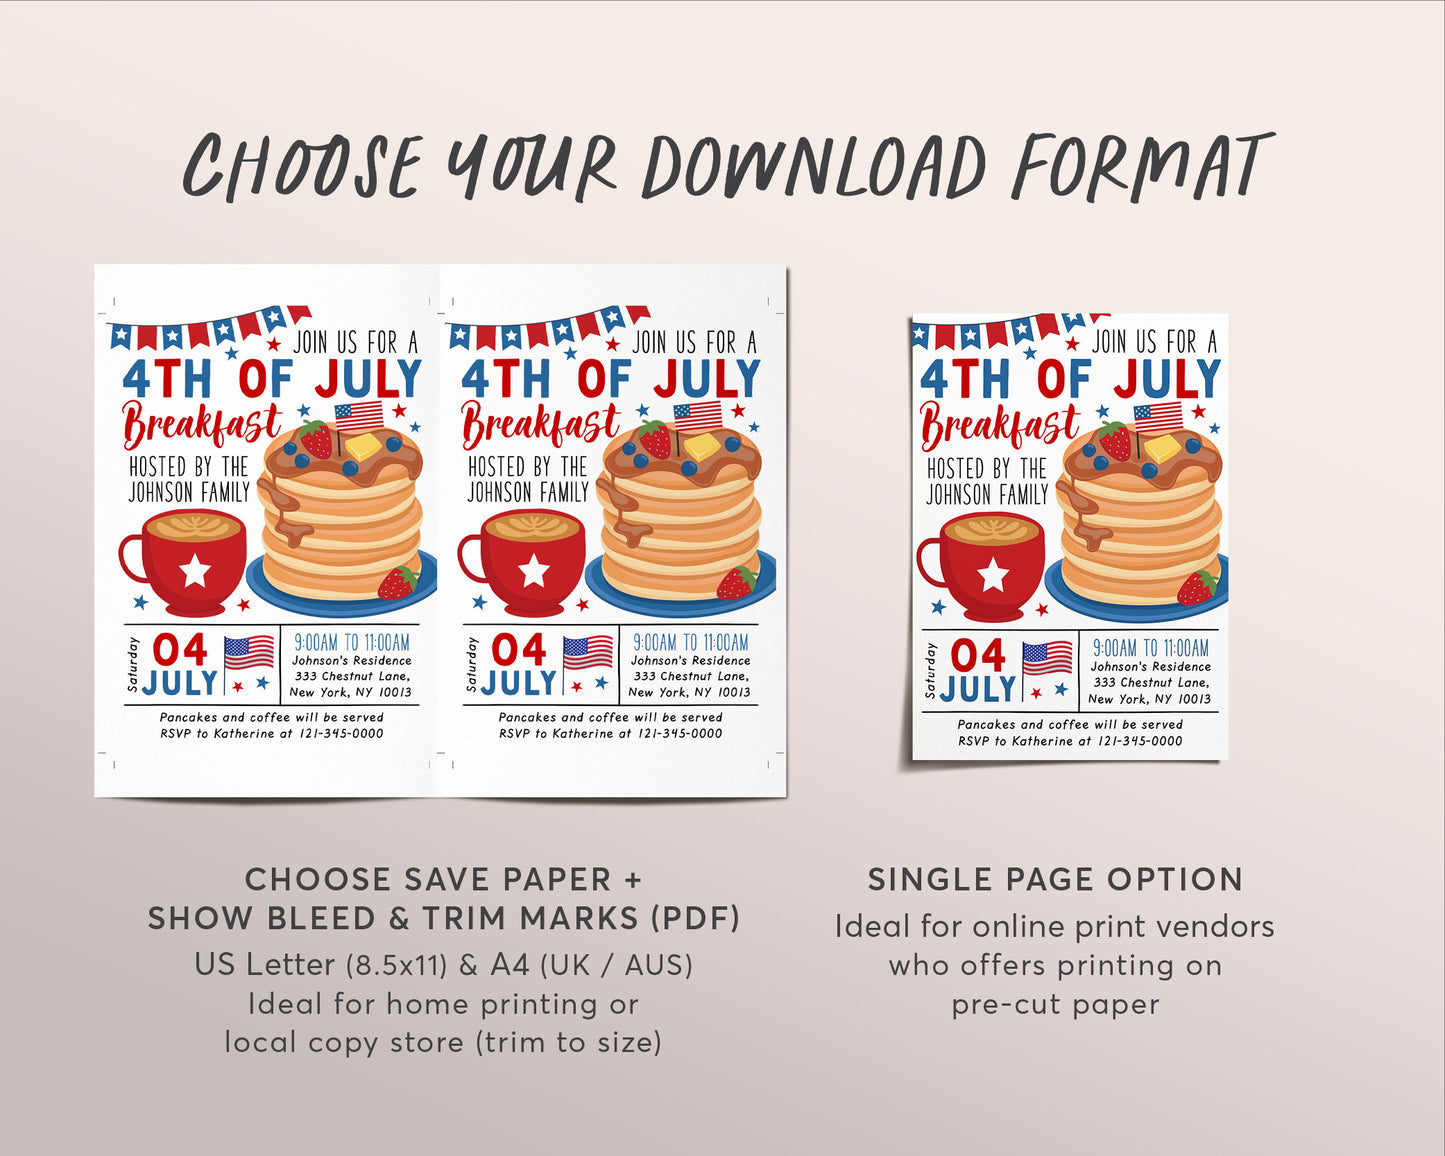 4th of July Breakfast Invitation Editable Template, Patriotic Fourth of July Pancakes Brunch Party Celebration Invite Independence Day